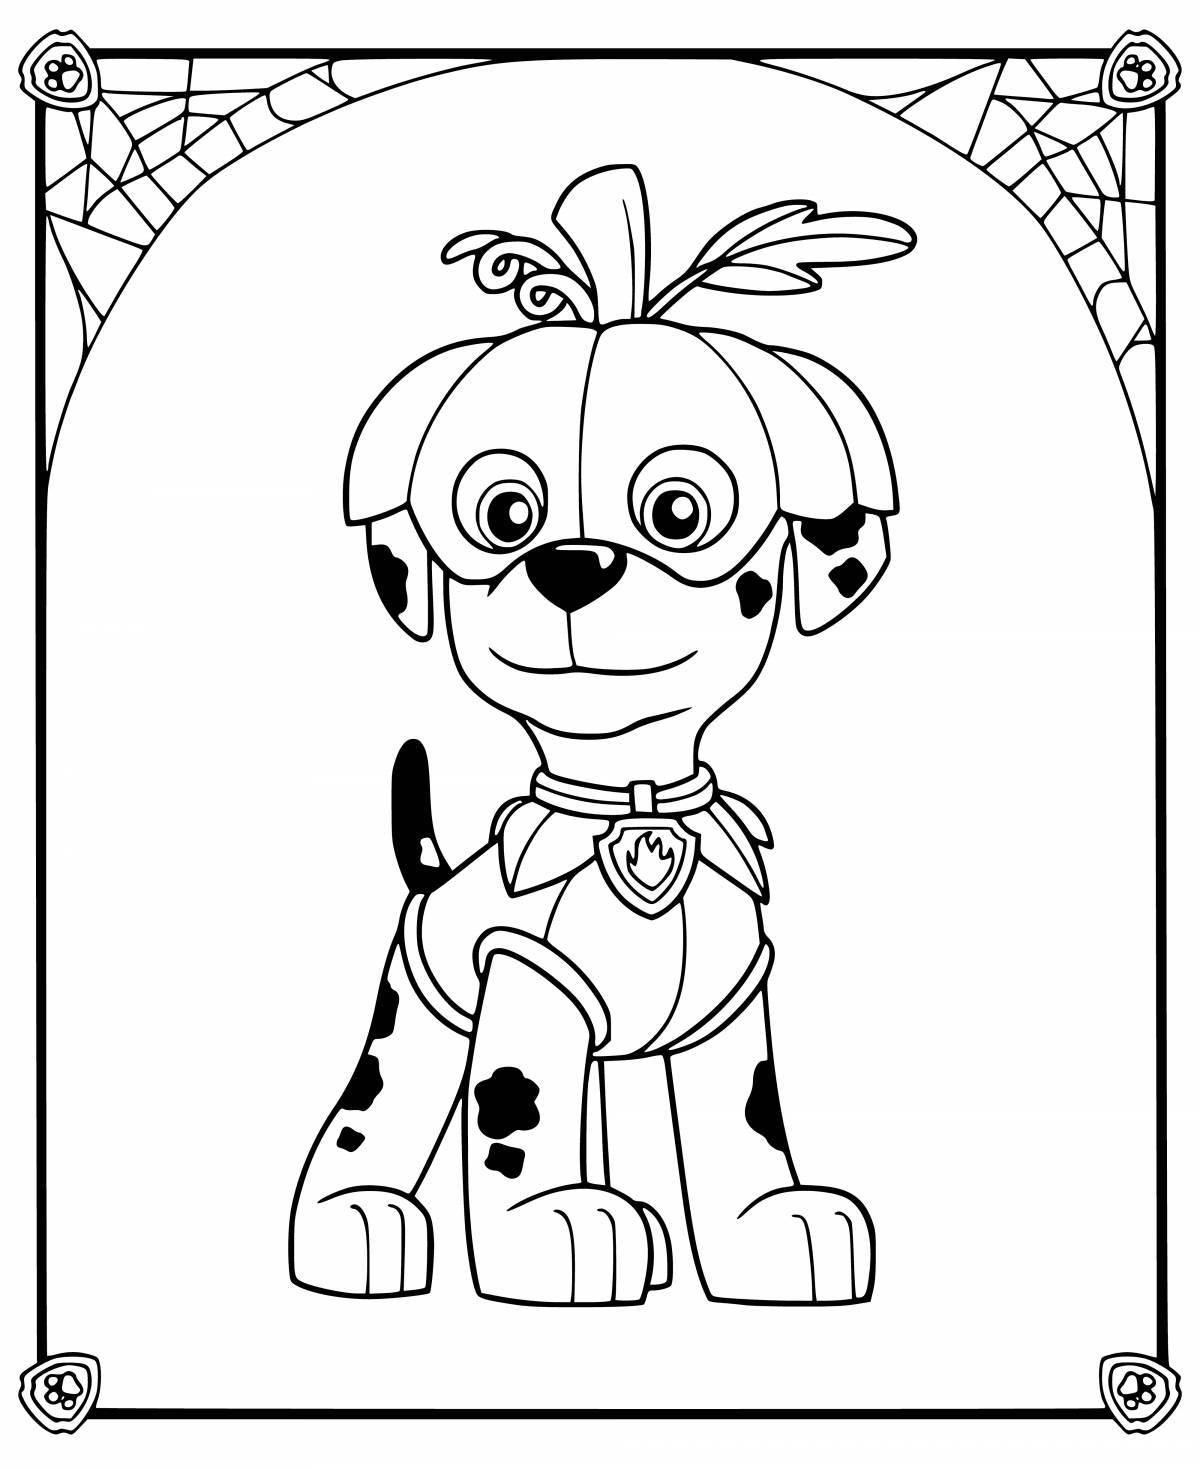 Glorious marshal coloring page